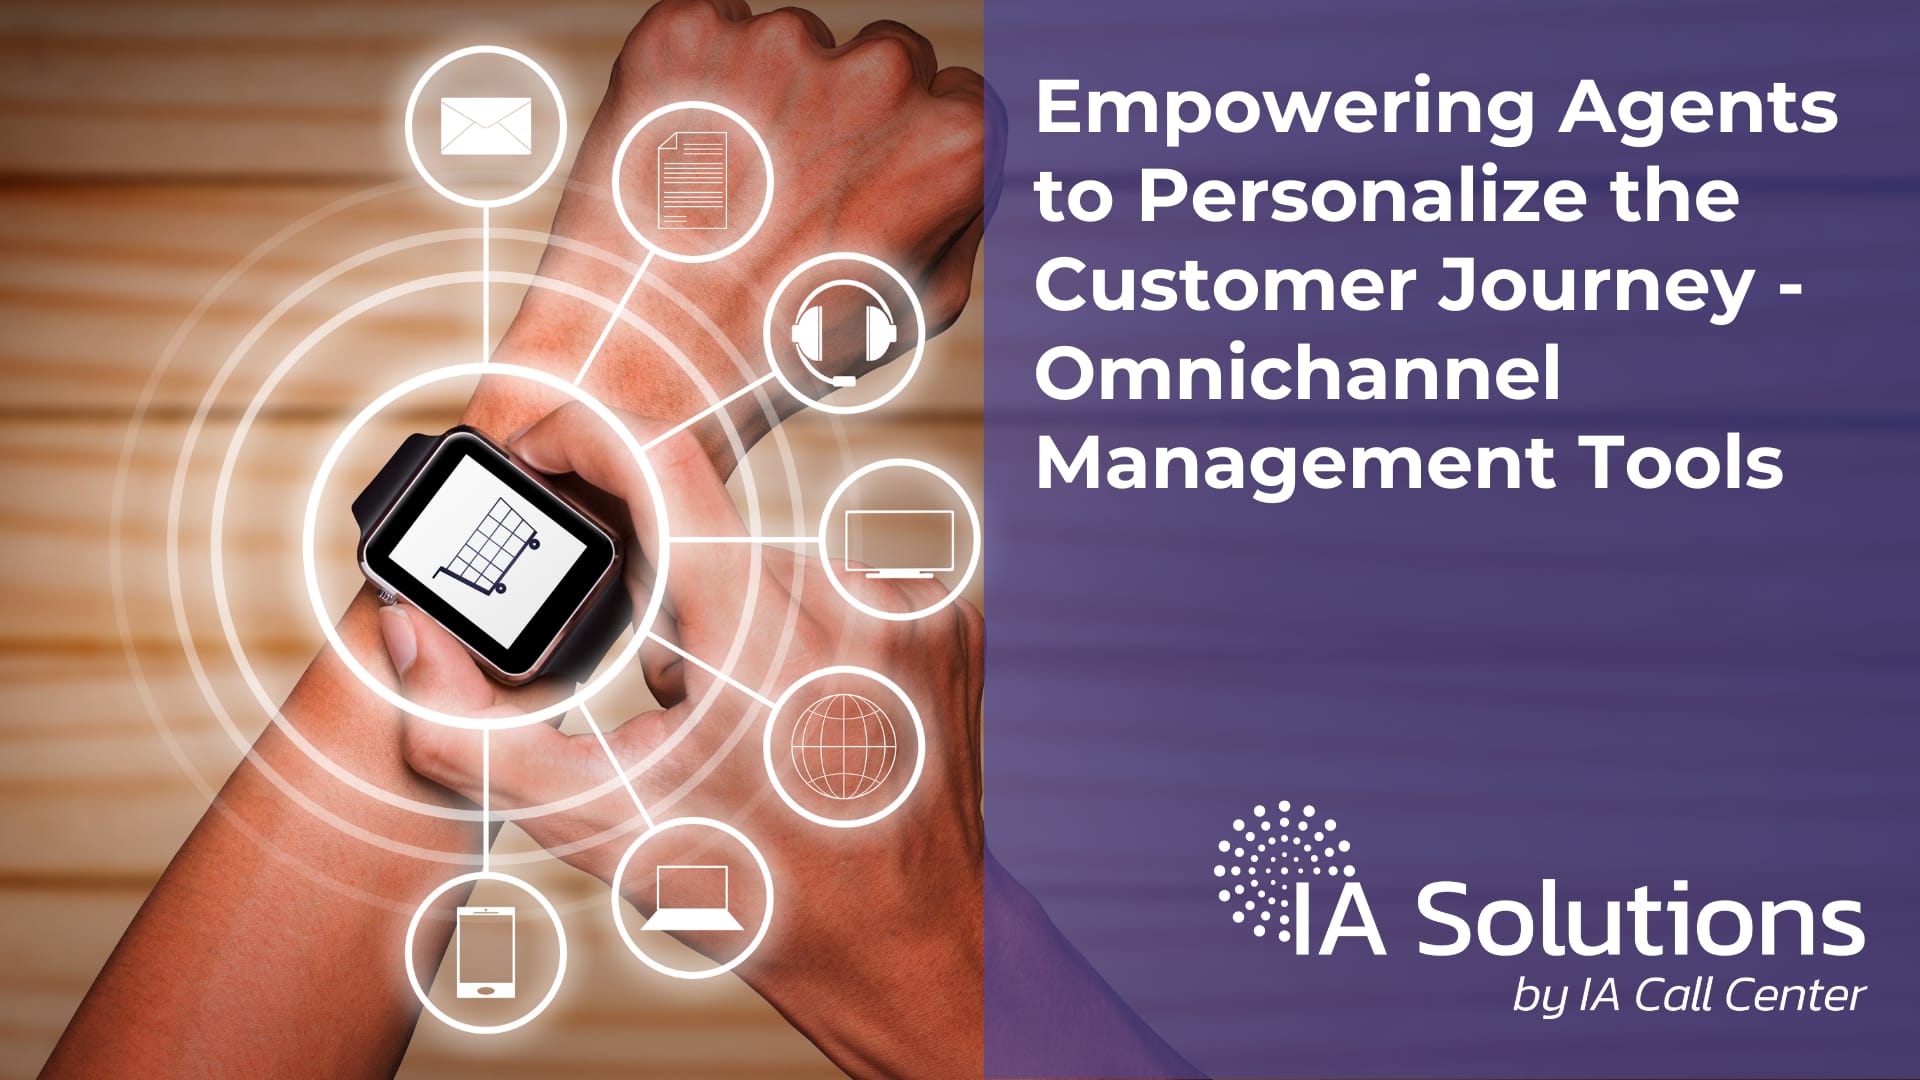 EMPOWERING AGENTS TO PERSONALIZE THE CUSTOMER JOURNEY WITH OMNICHANNEL